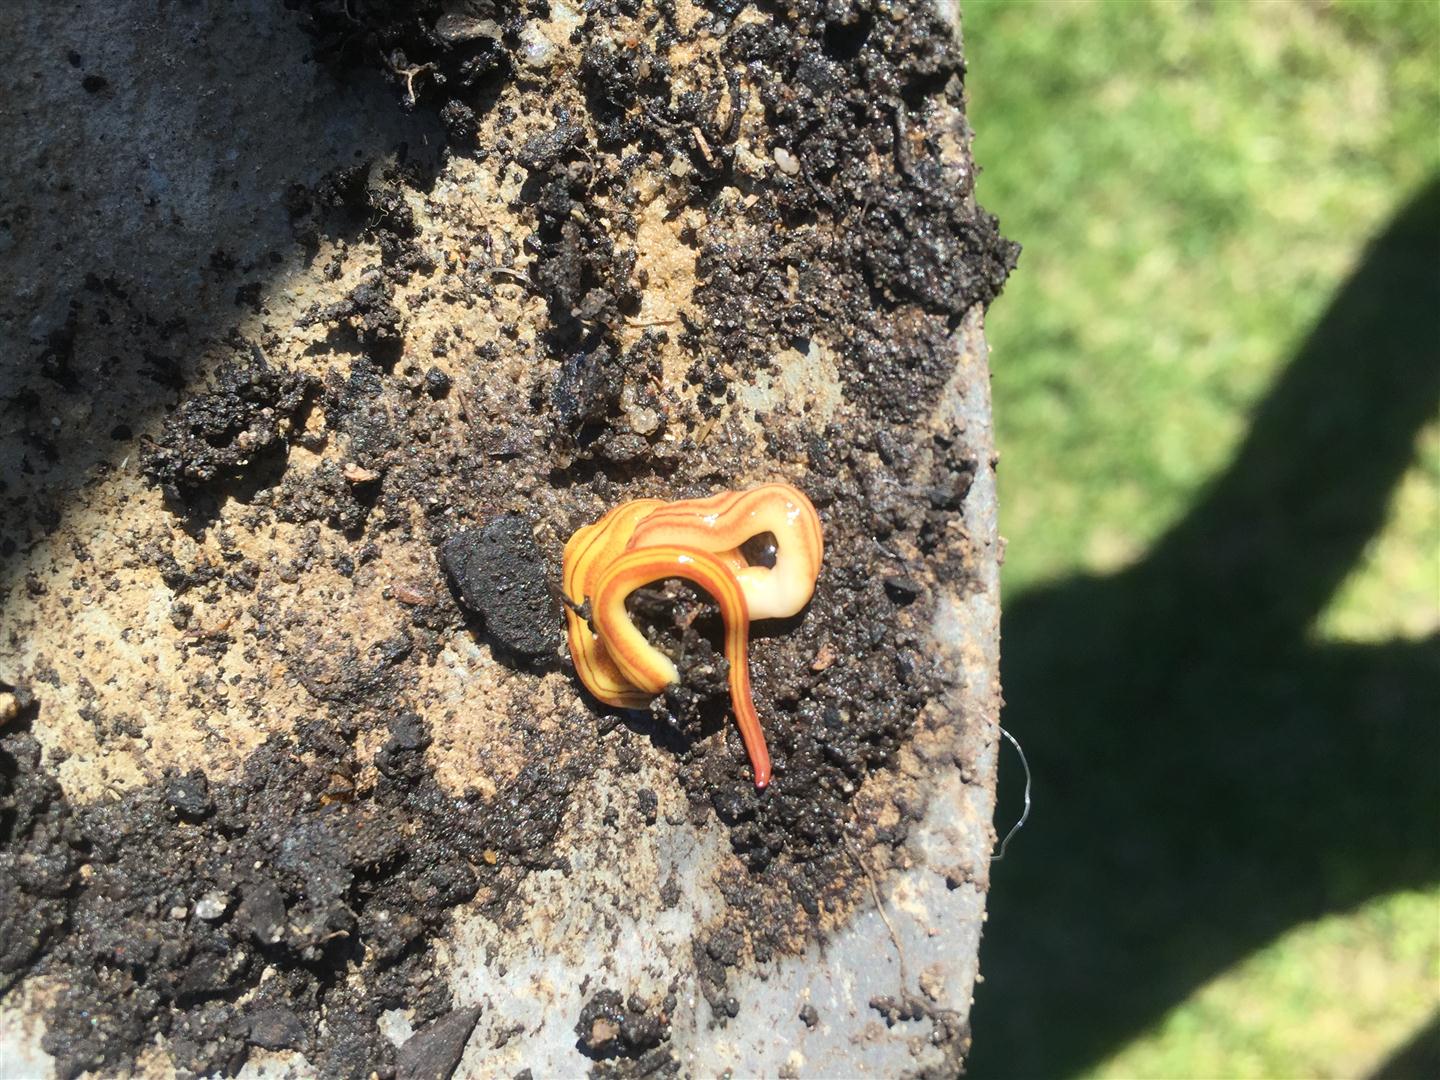 Unknown Worms or Parasites Garden Beds - Burke's Backyard